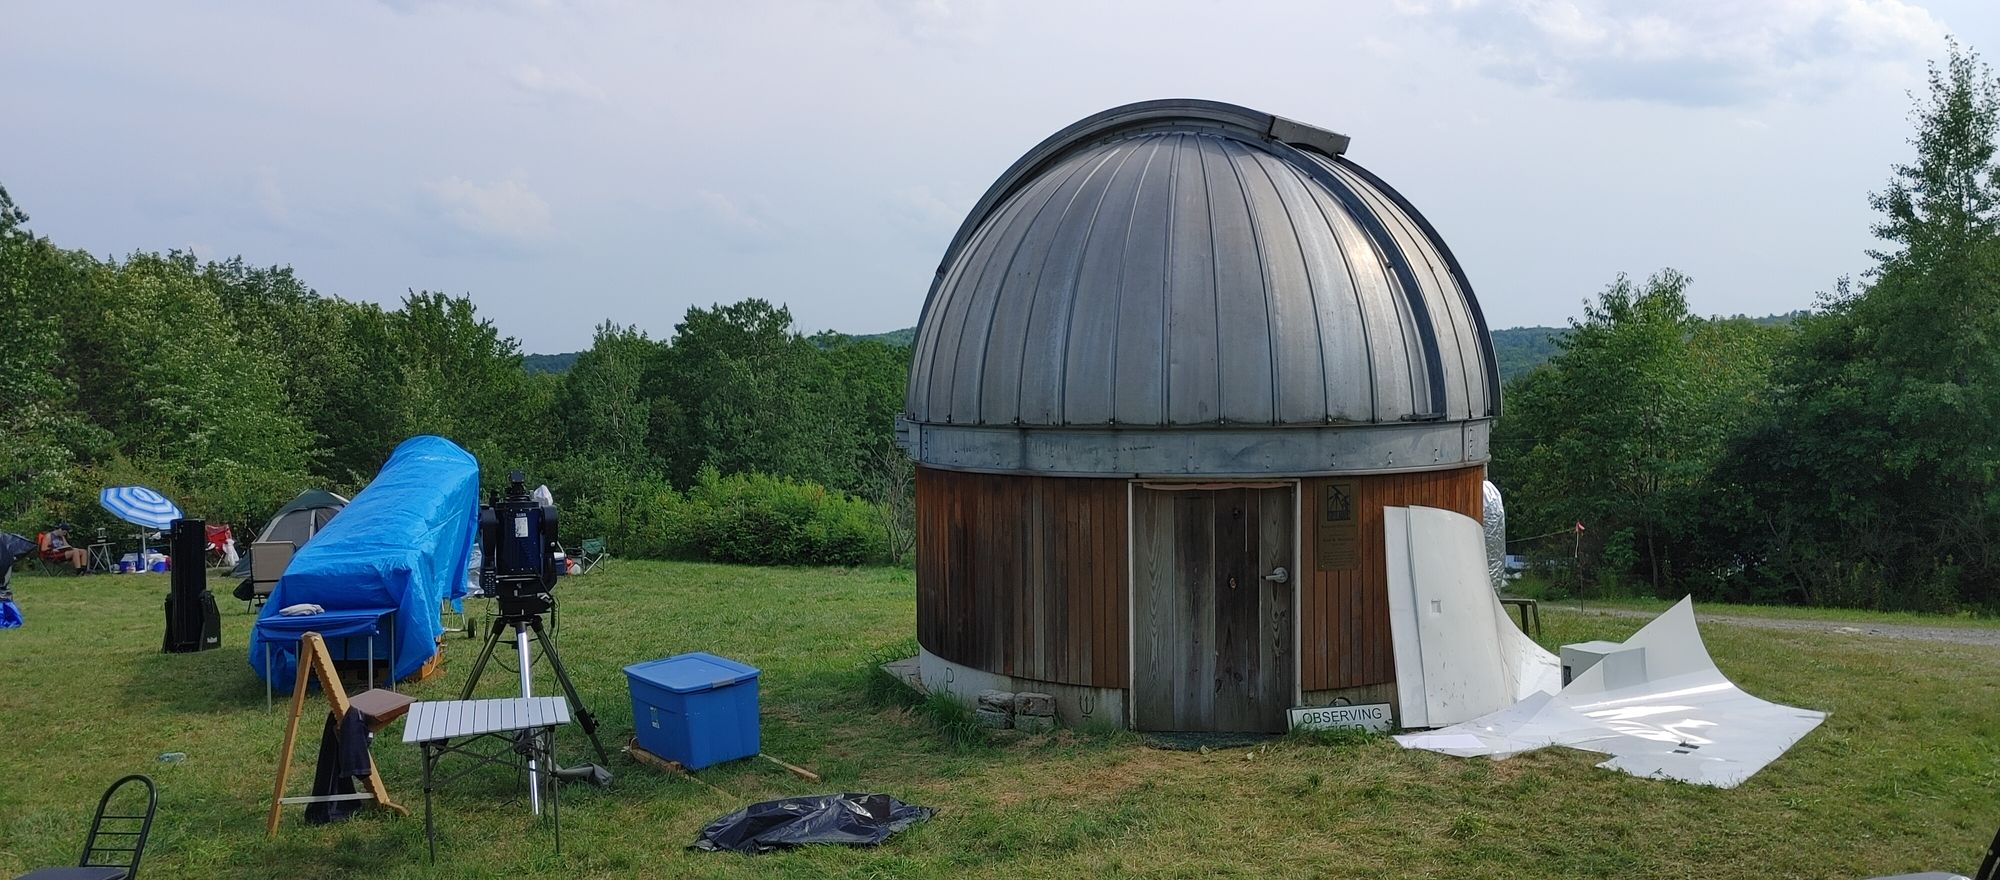 An observatory on top of a grassy hill